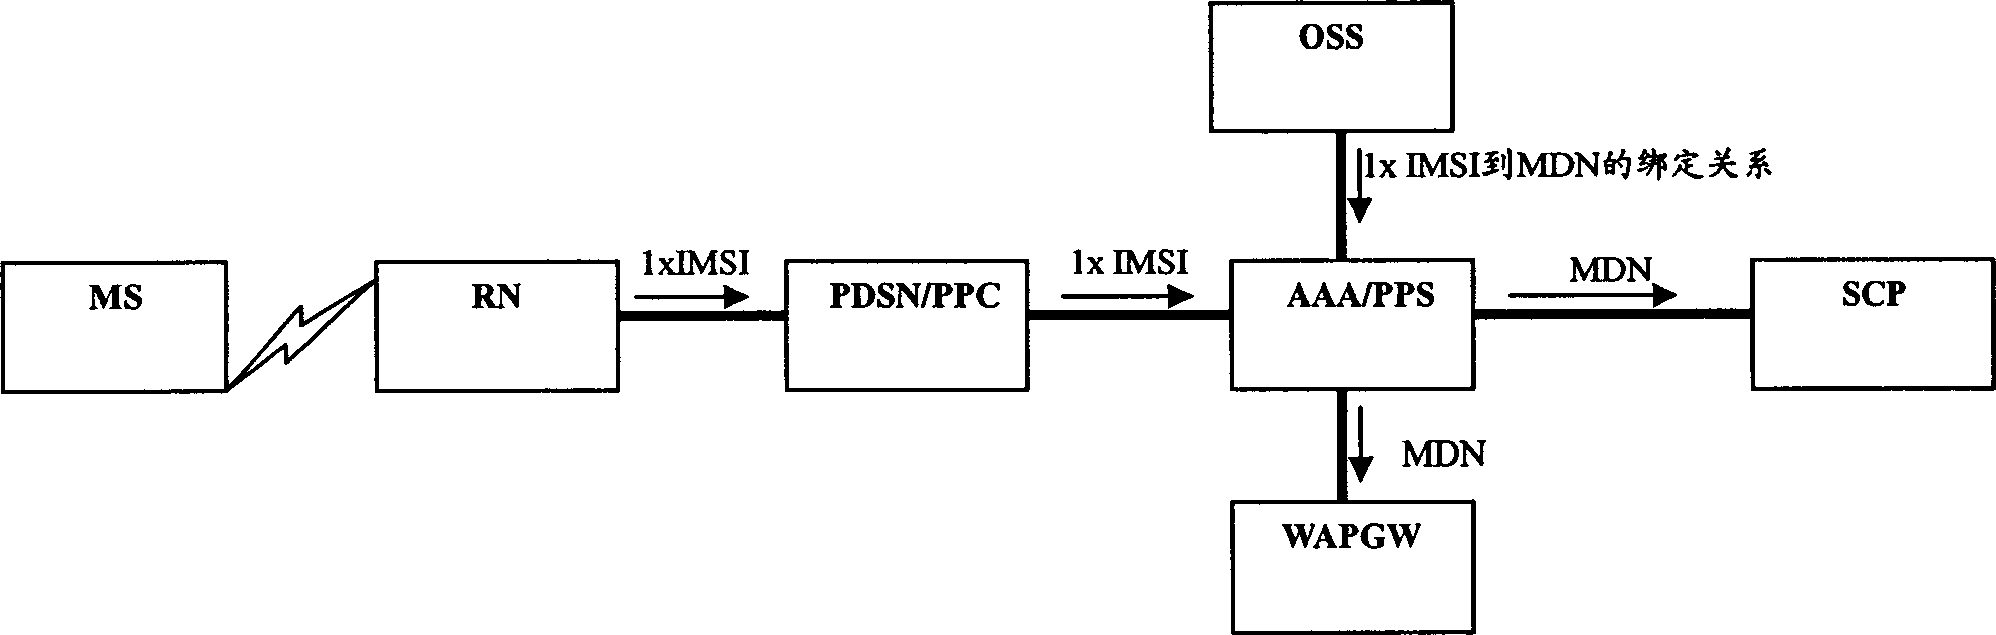 Method and system for realizing prepayment business for communication network